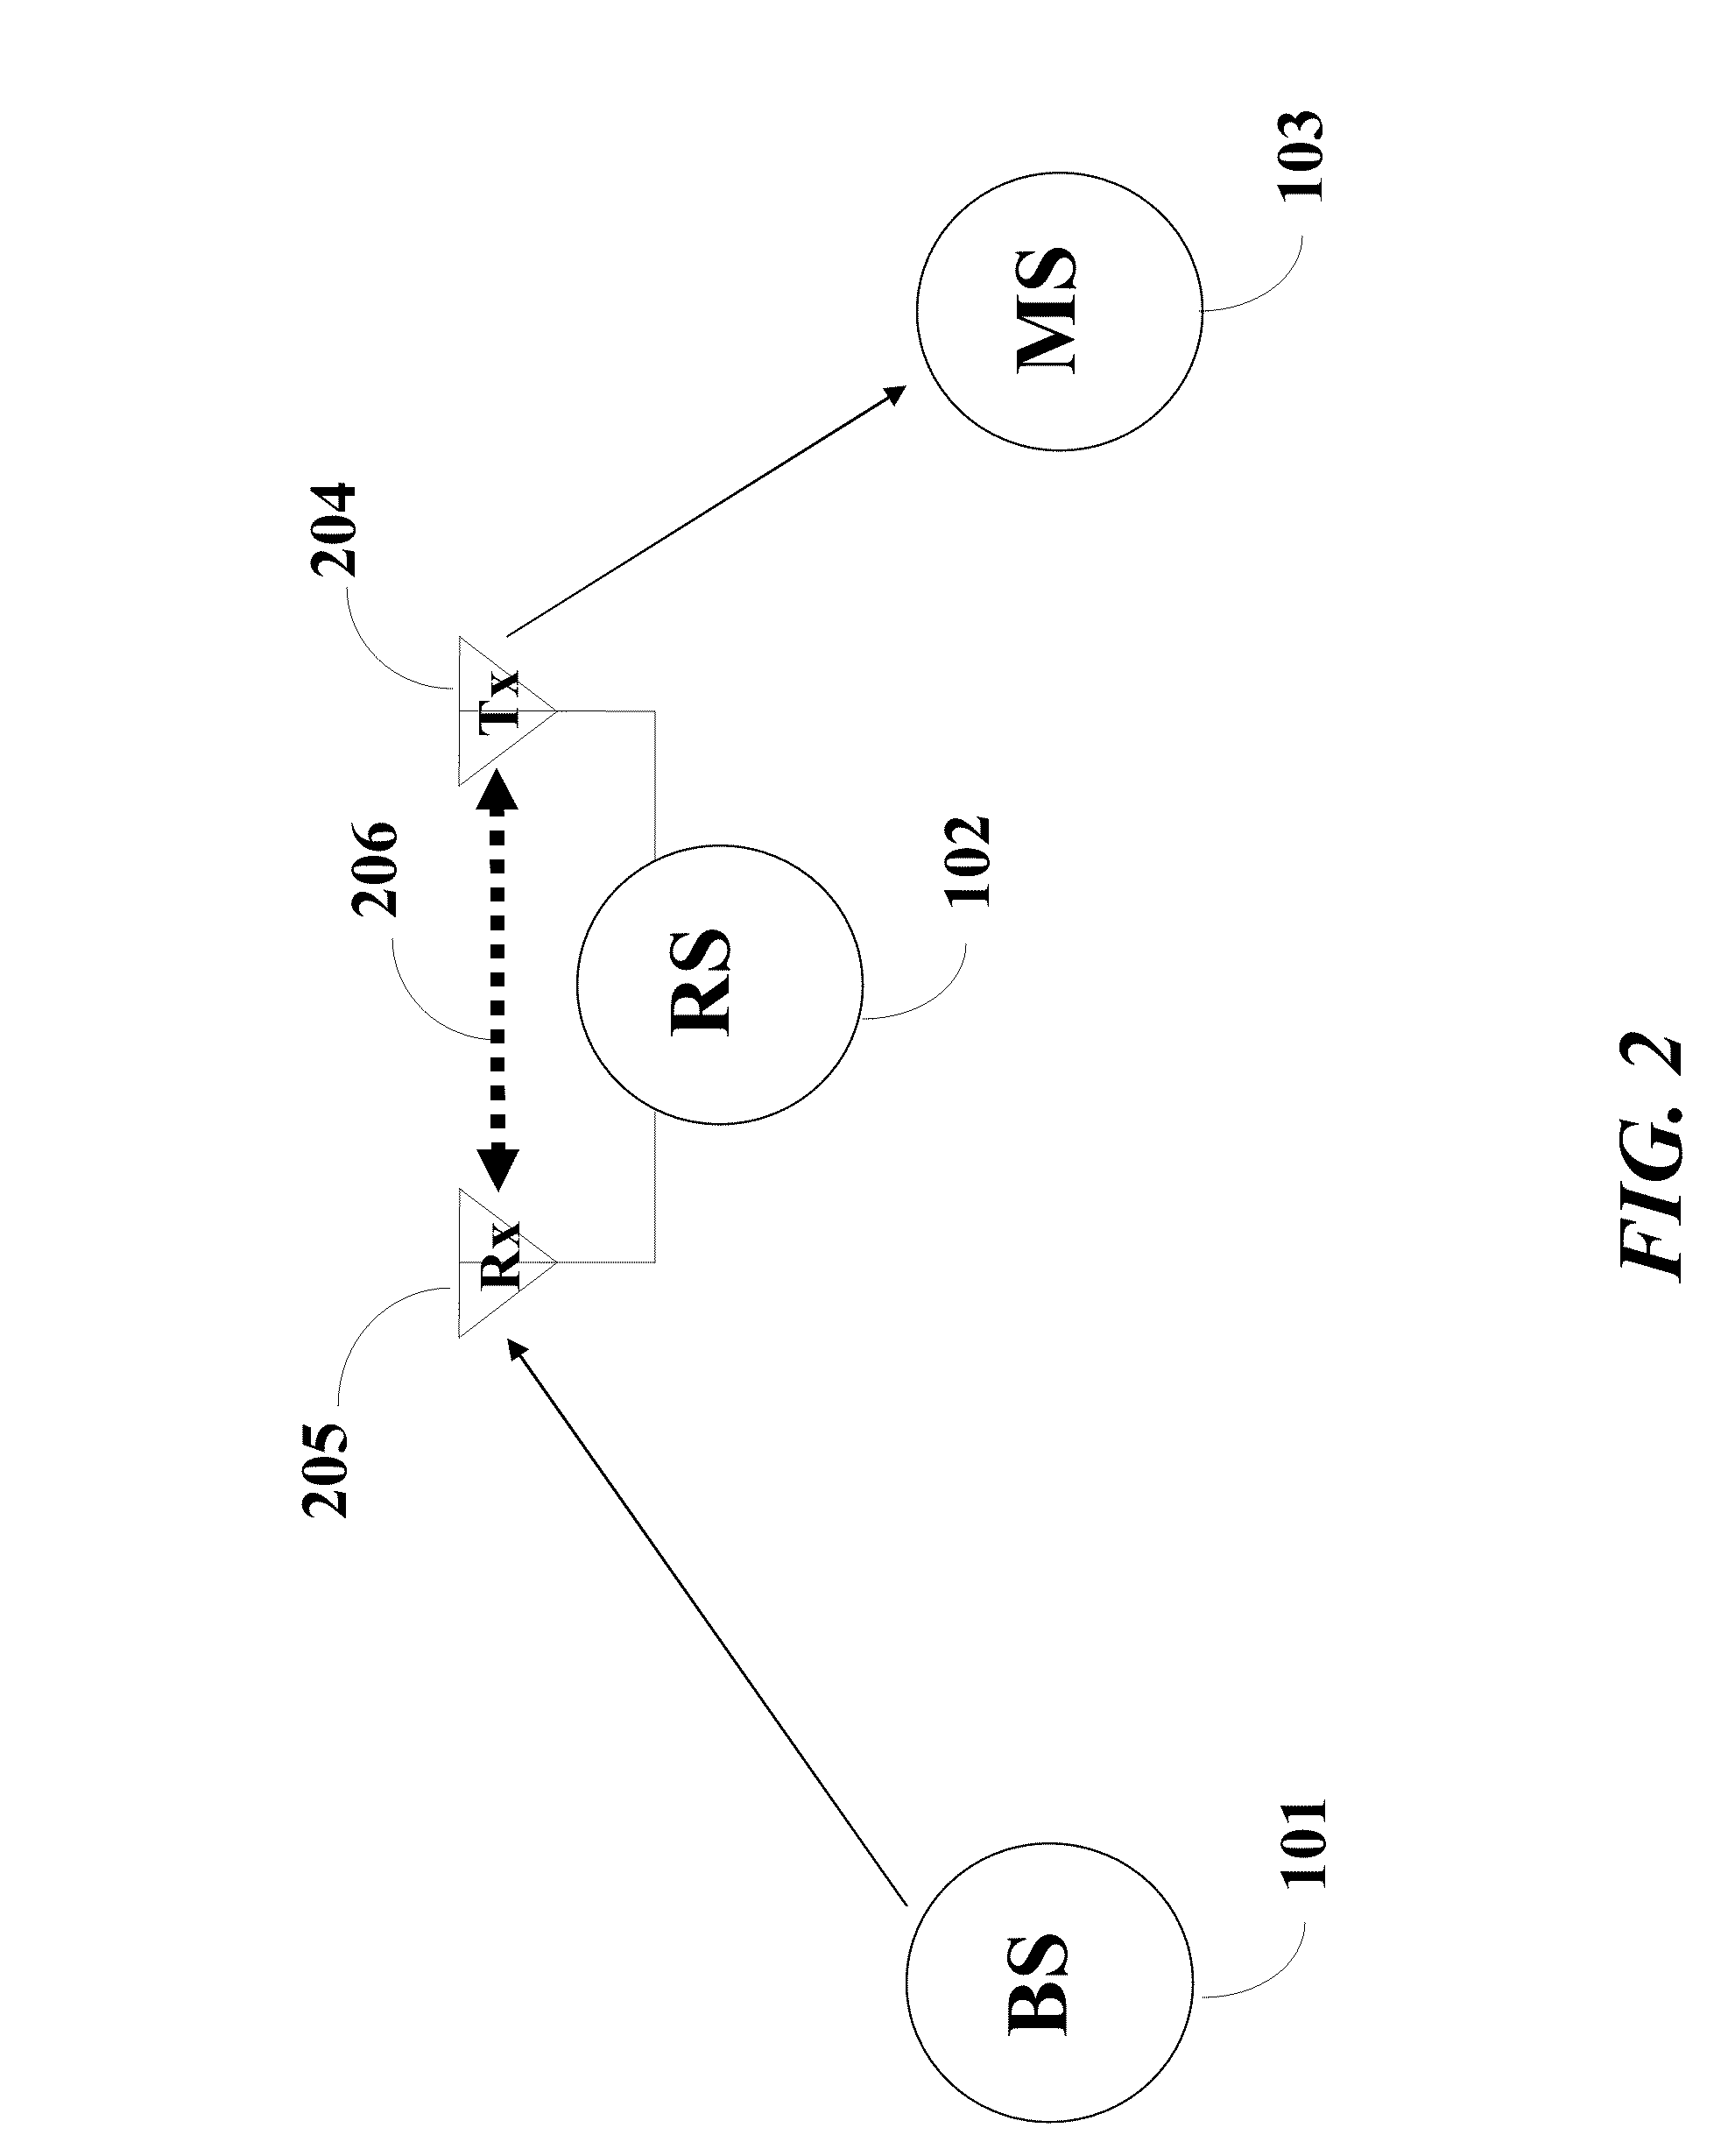 Cross-Talk Cancellation in Cooperative Wireless Relay Networks